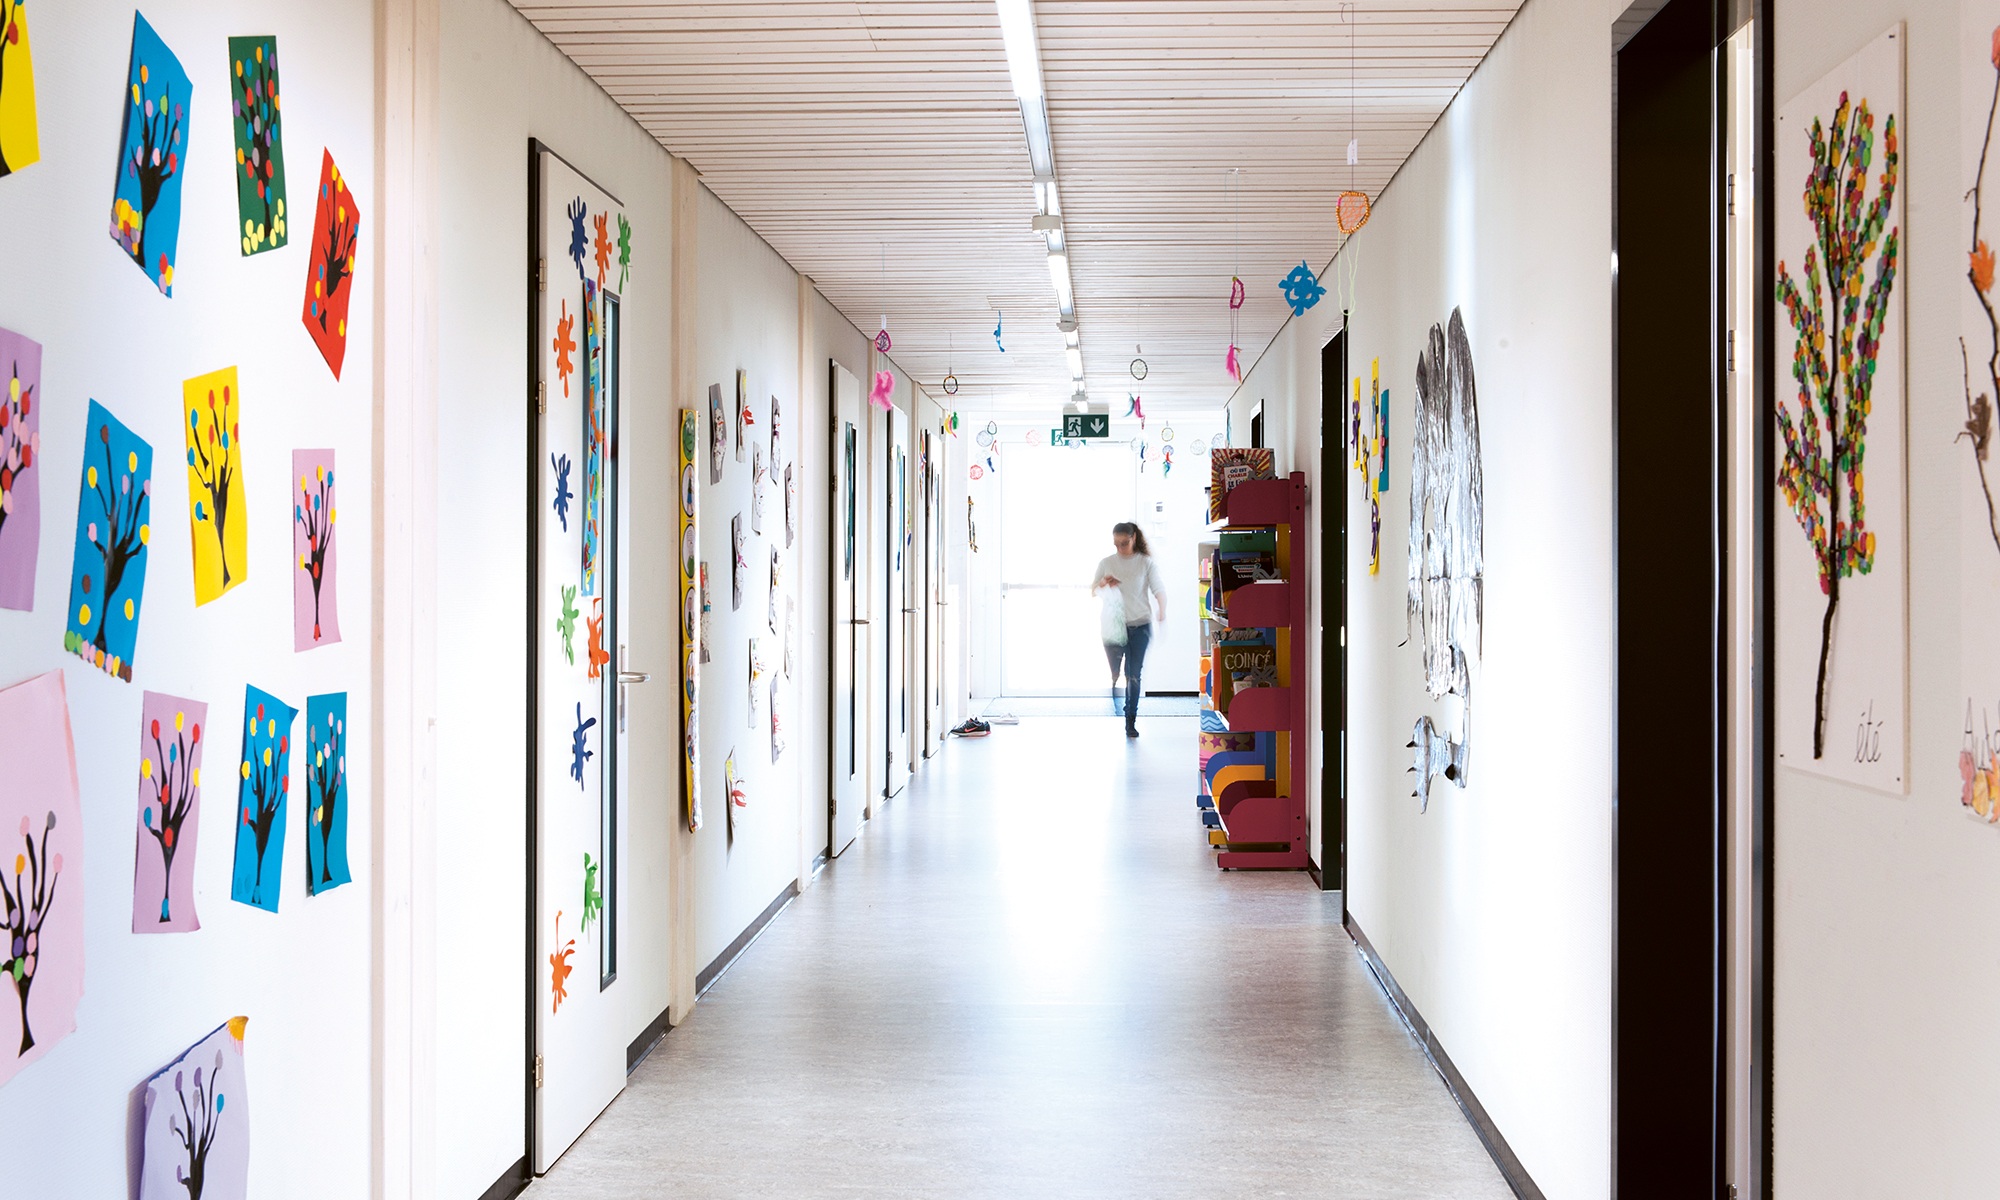 Wide, bright corridors channel the flow of pupils